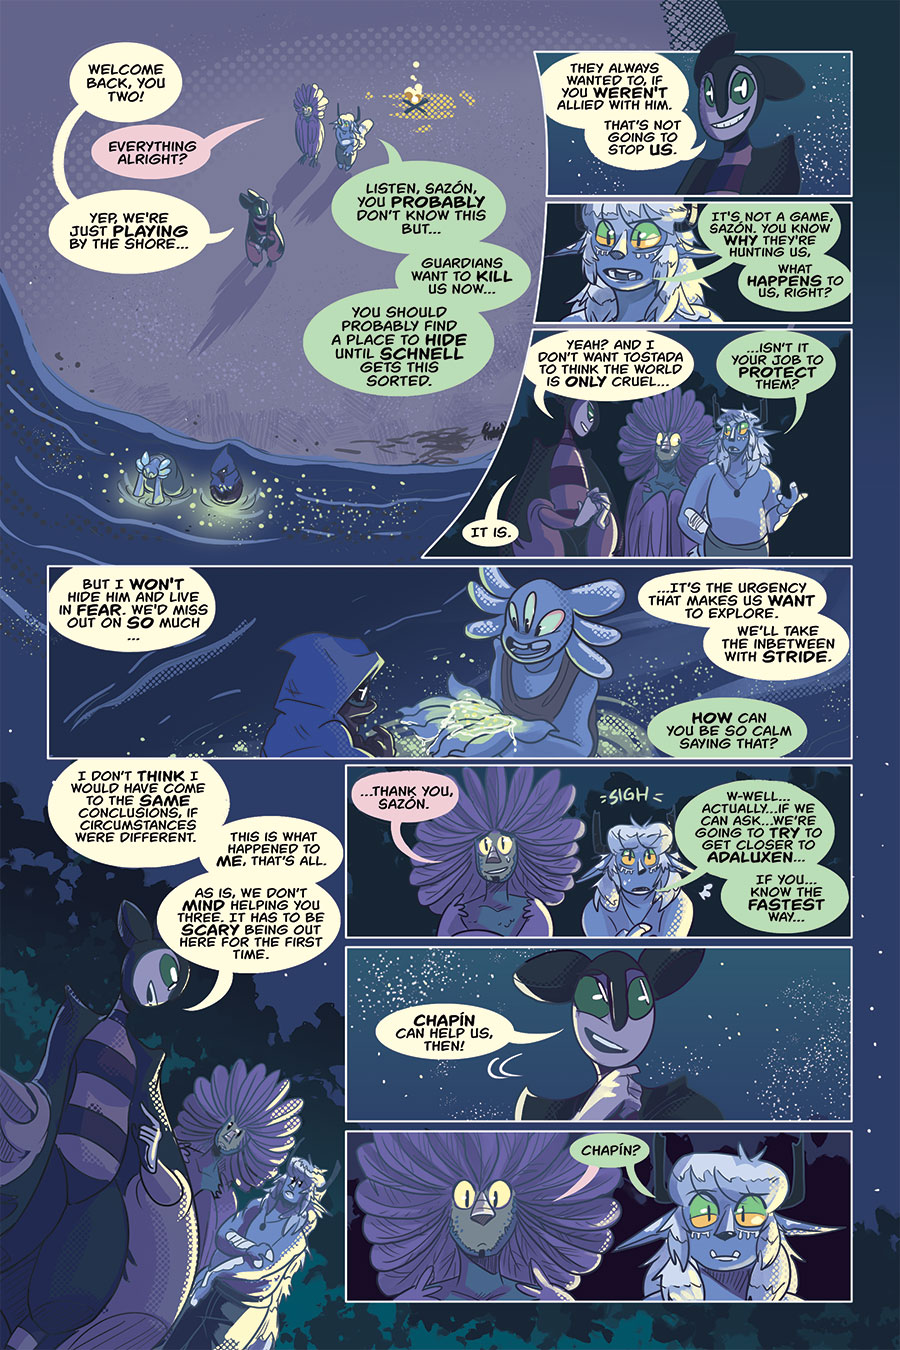 Gone Fishing 006, page 7